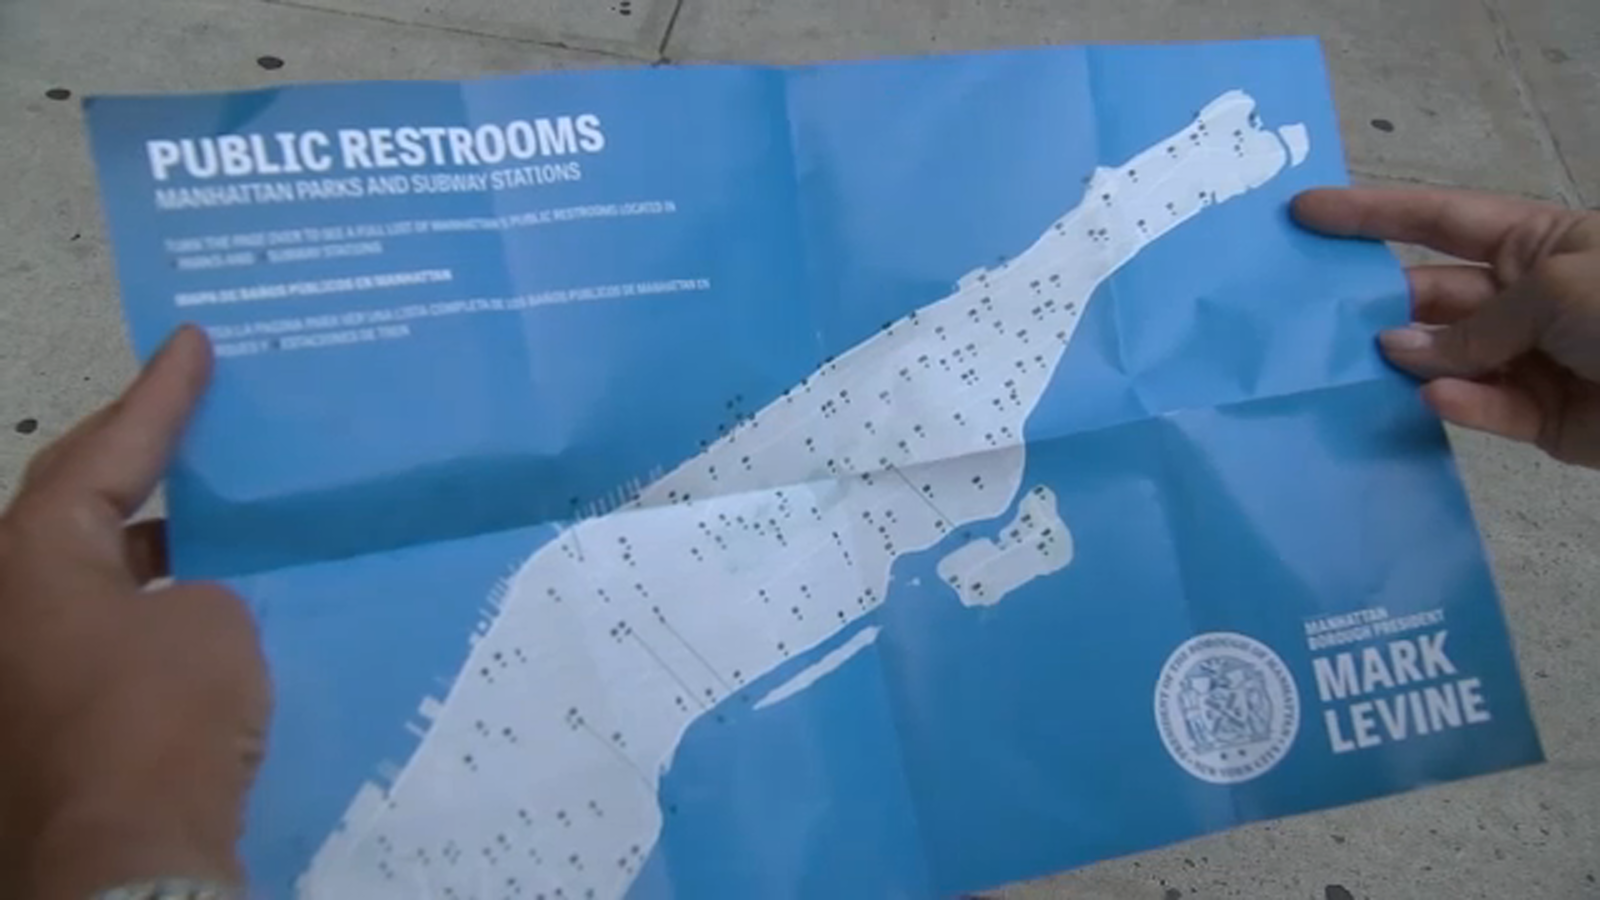 New map offers guide to free public bathrooms across New York City